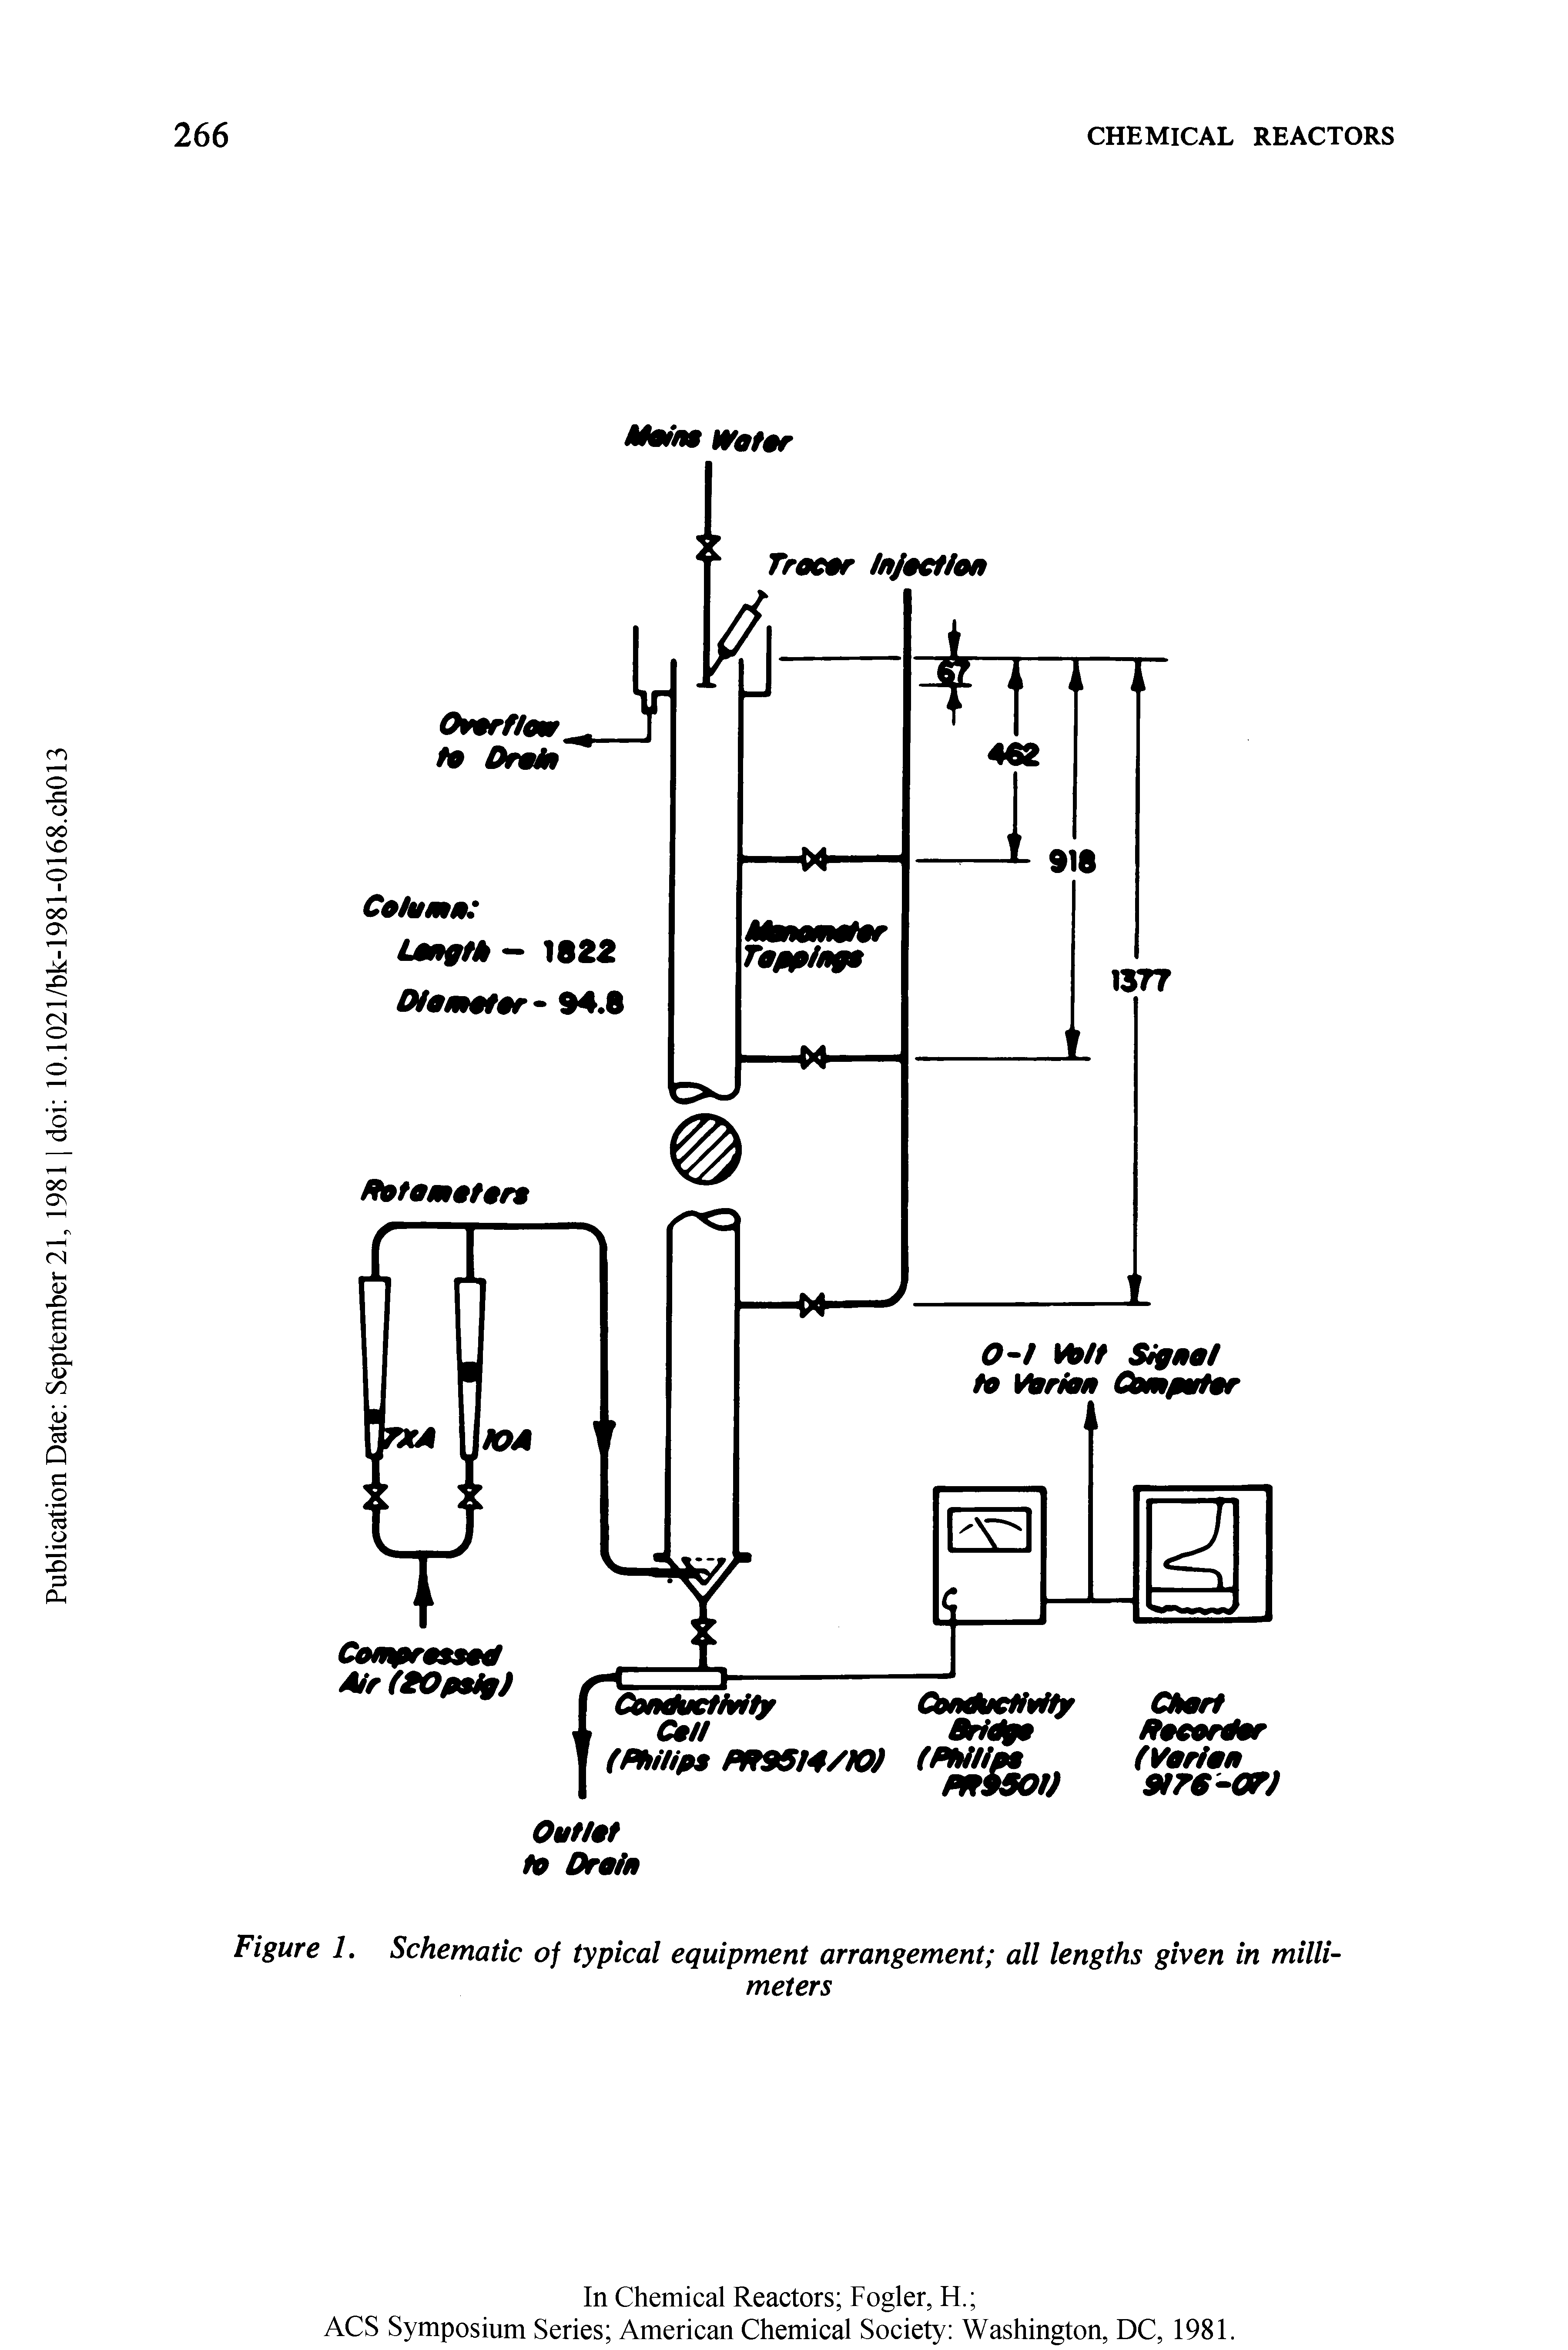 Figure 1. Schematic of typical equipment arrangement all lengths given in millimeters...